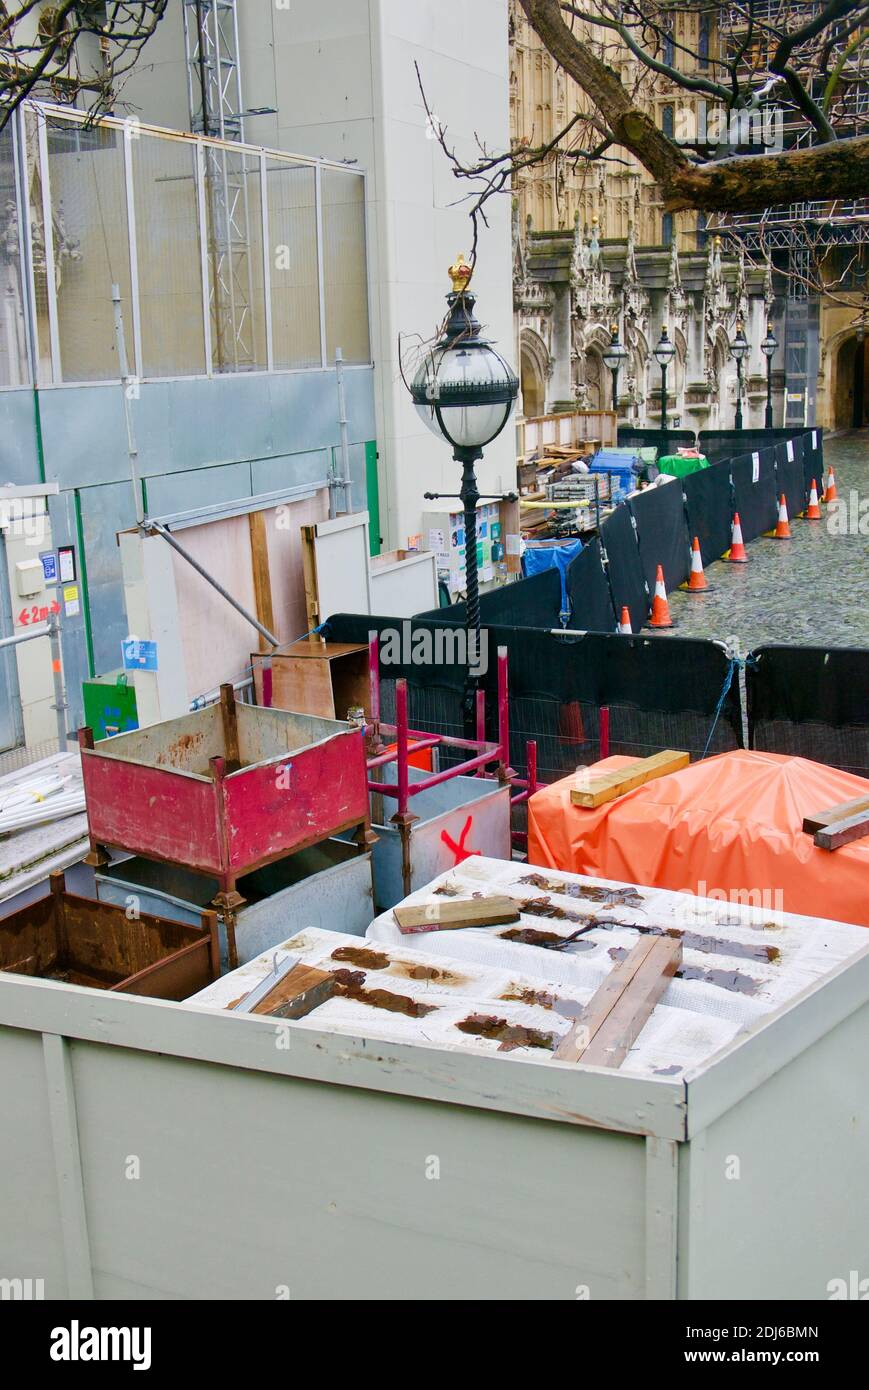 Builders yard in Palace of Westminster carrying out restoration and renovation to the Big Ben clock tower (otherwise known as Elizabeth Tower). London Stock Photo